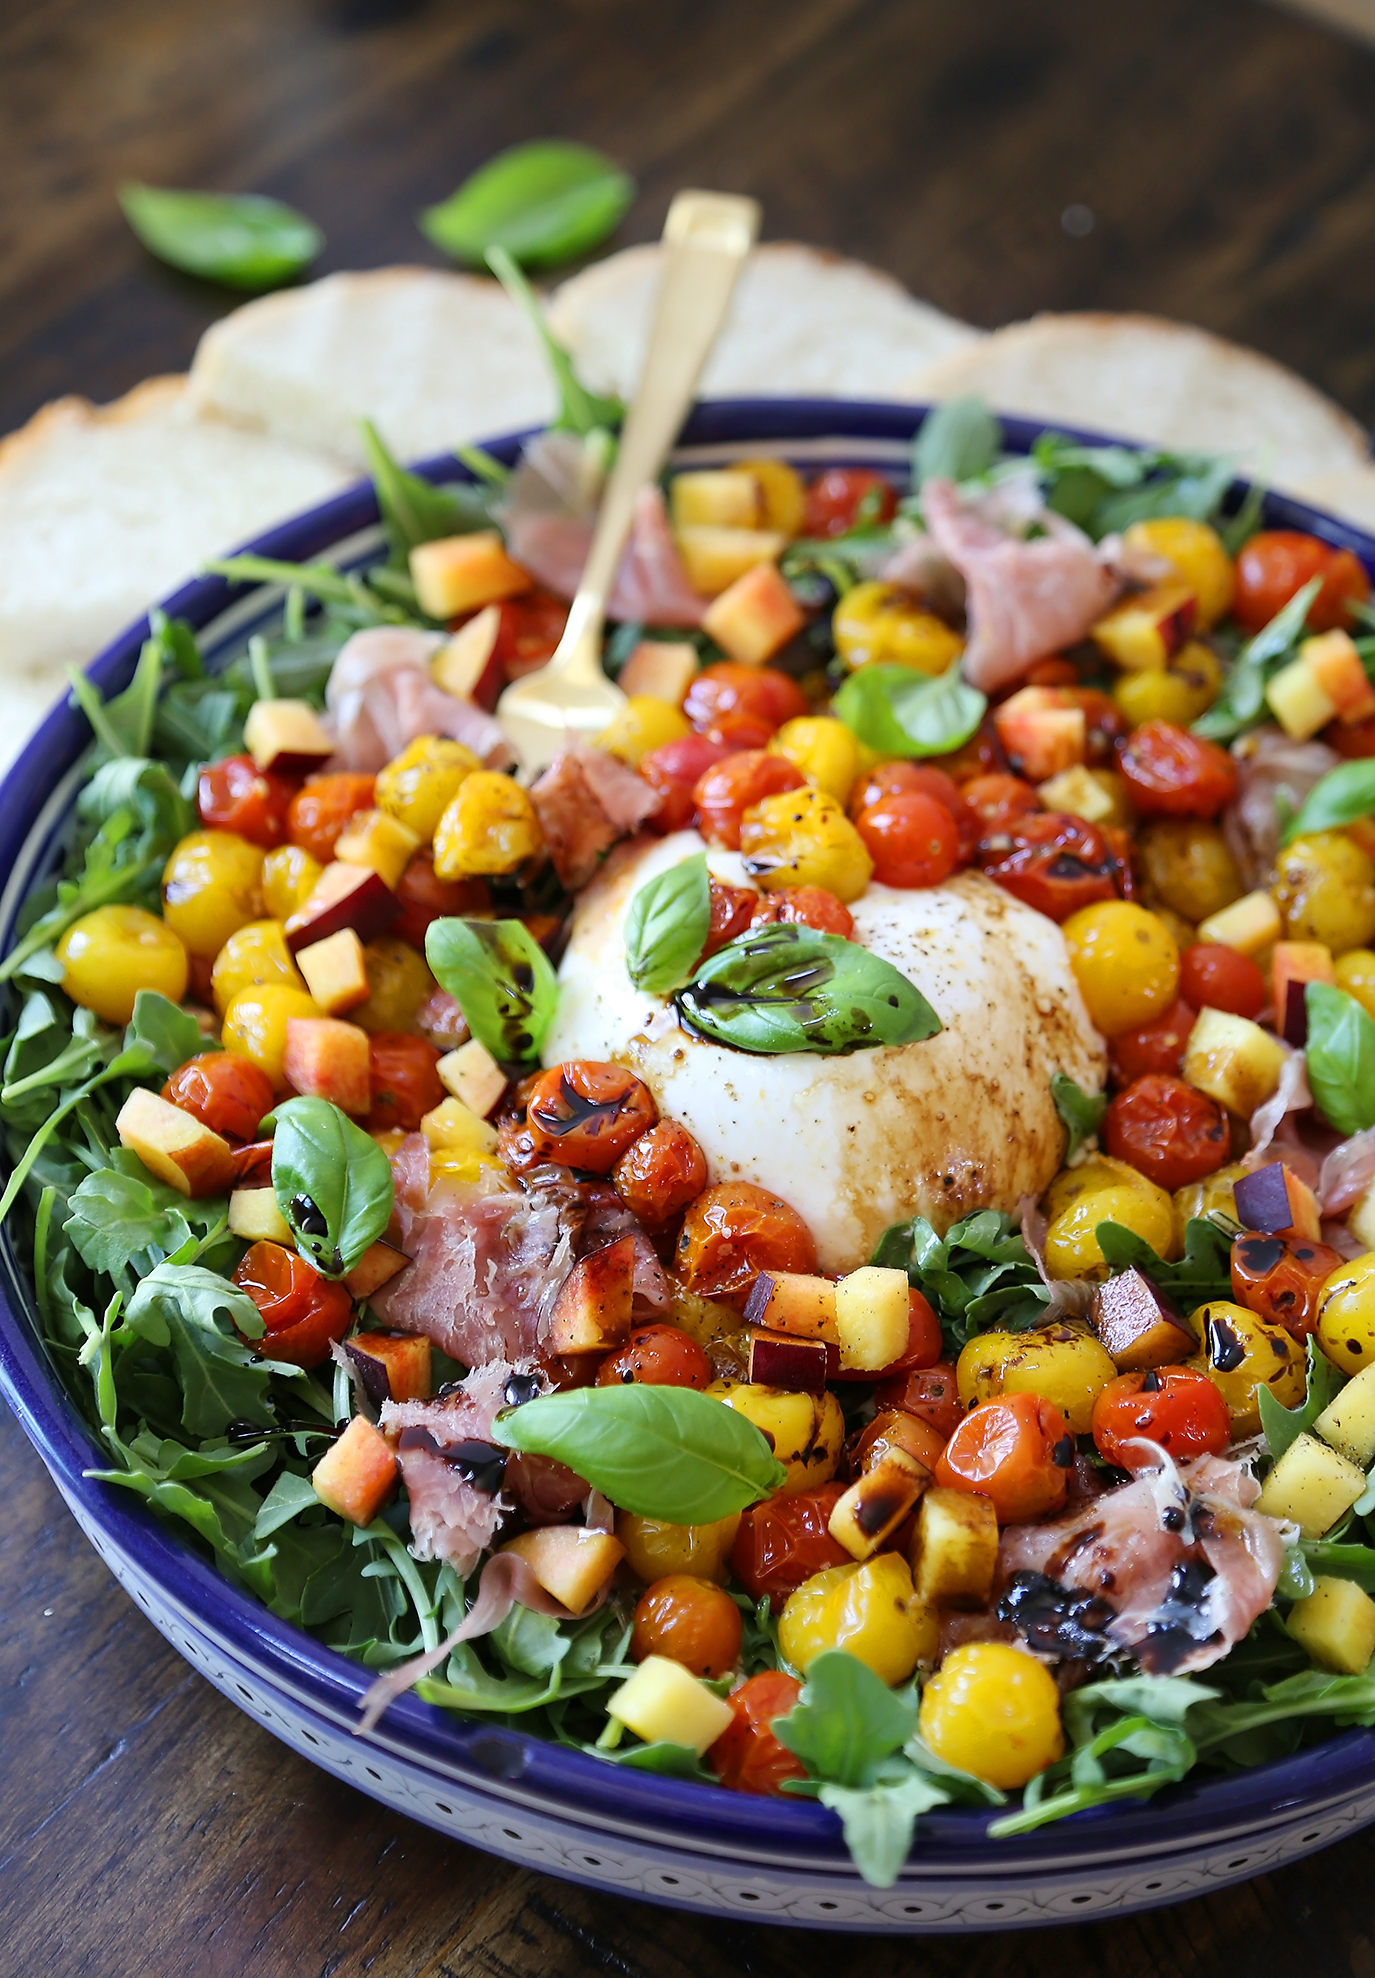 Burrata Caprese Salad with Peach and Proscuitto - Perfect for parties and lazy weeknights! Sweet peaches, salty prosciutto and roasted tomatoes nestled in arugula with fresh mozz. thecomfortofcooking.com